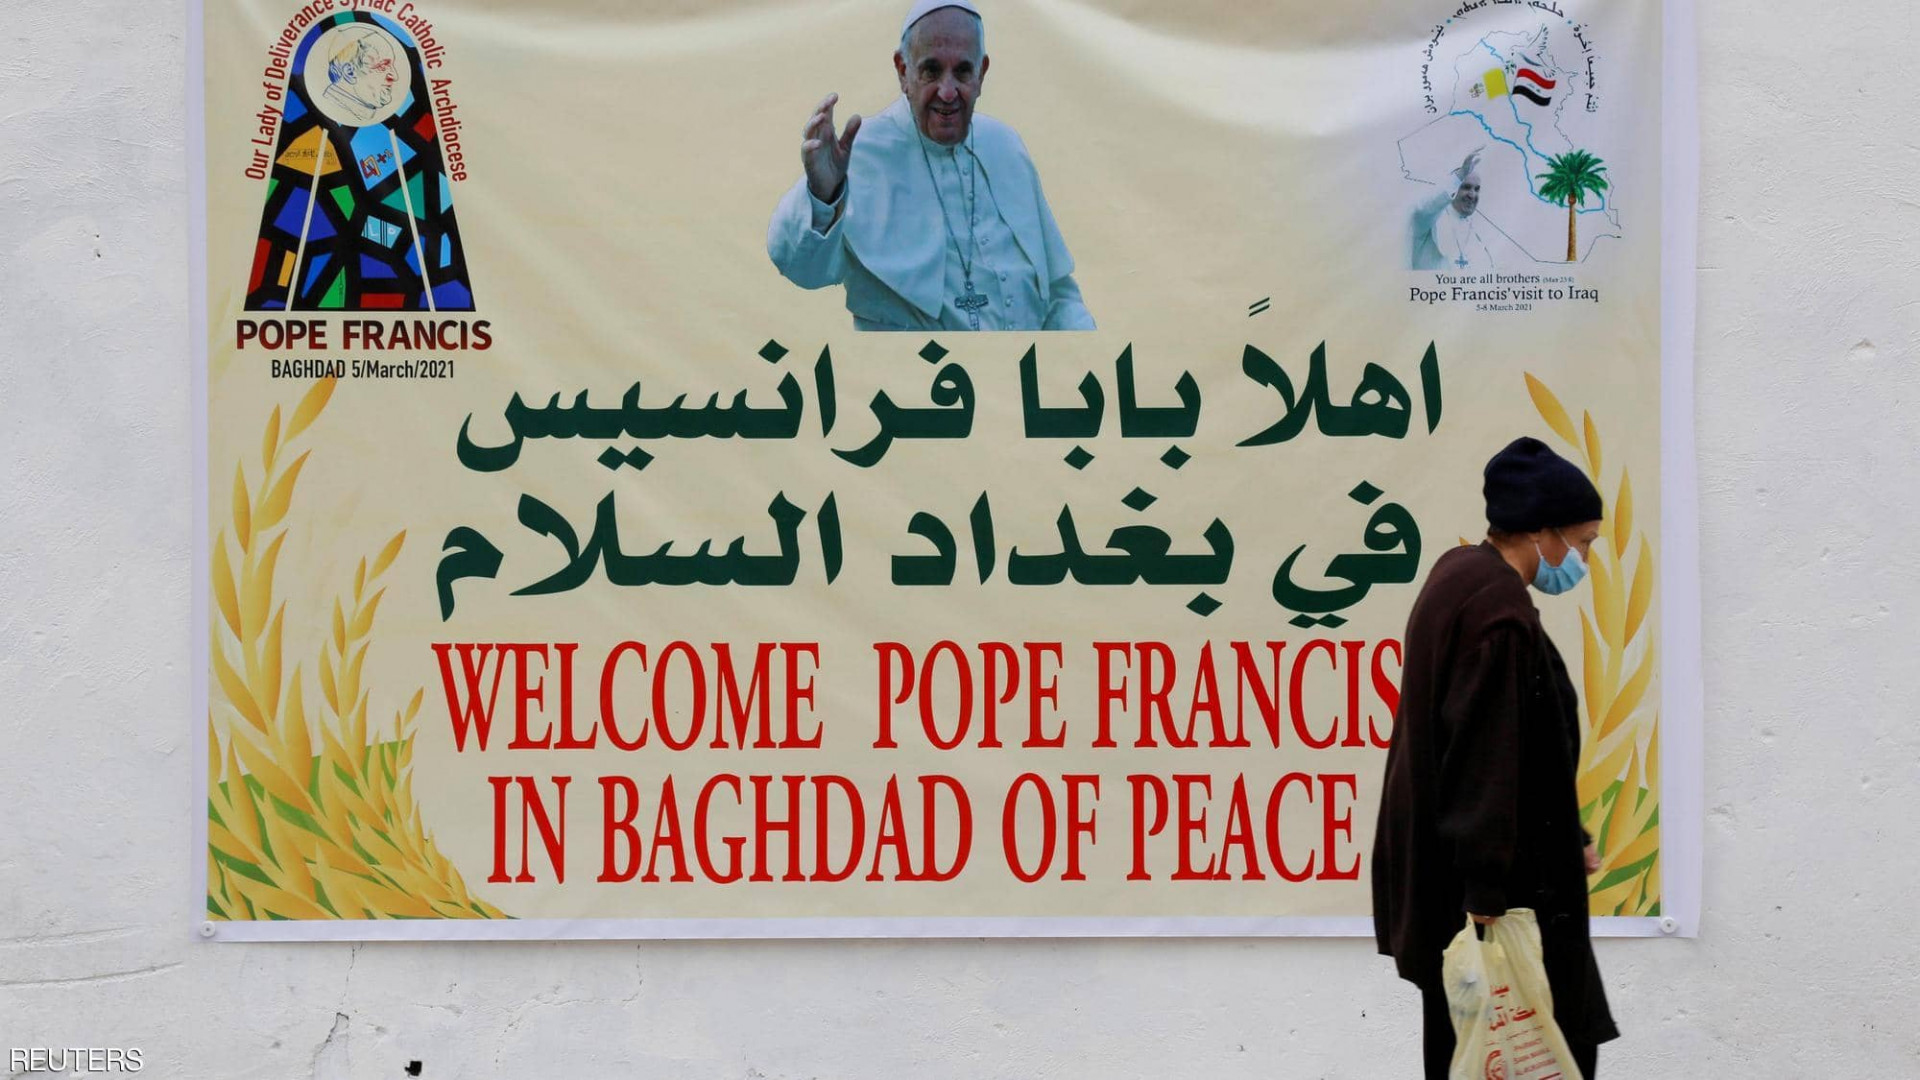 Analysis: In Iraq, Pope Can Deepen Ties With Church’s Natural Islamic Partners